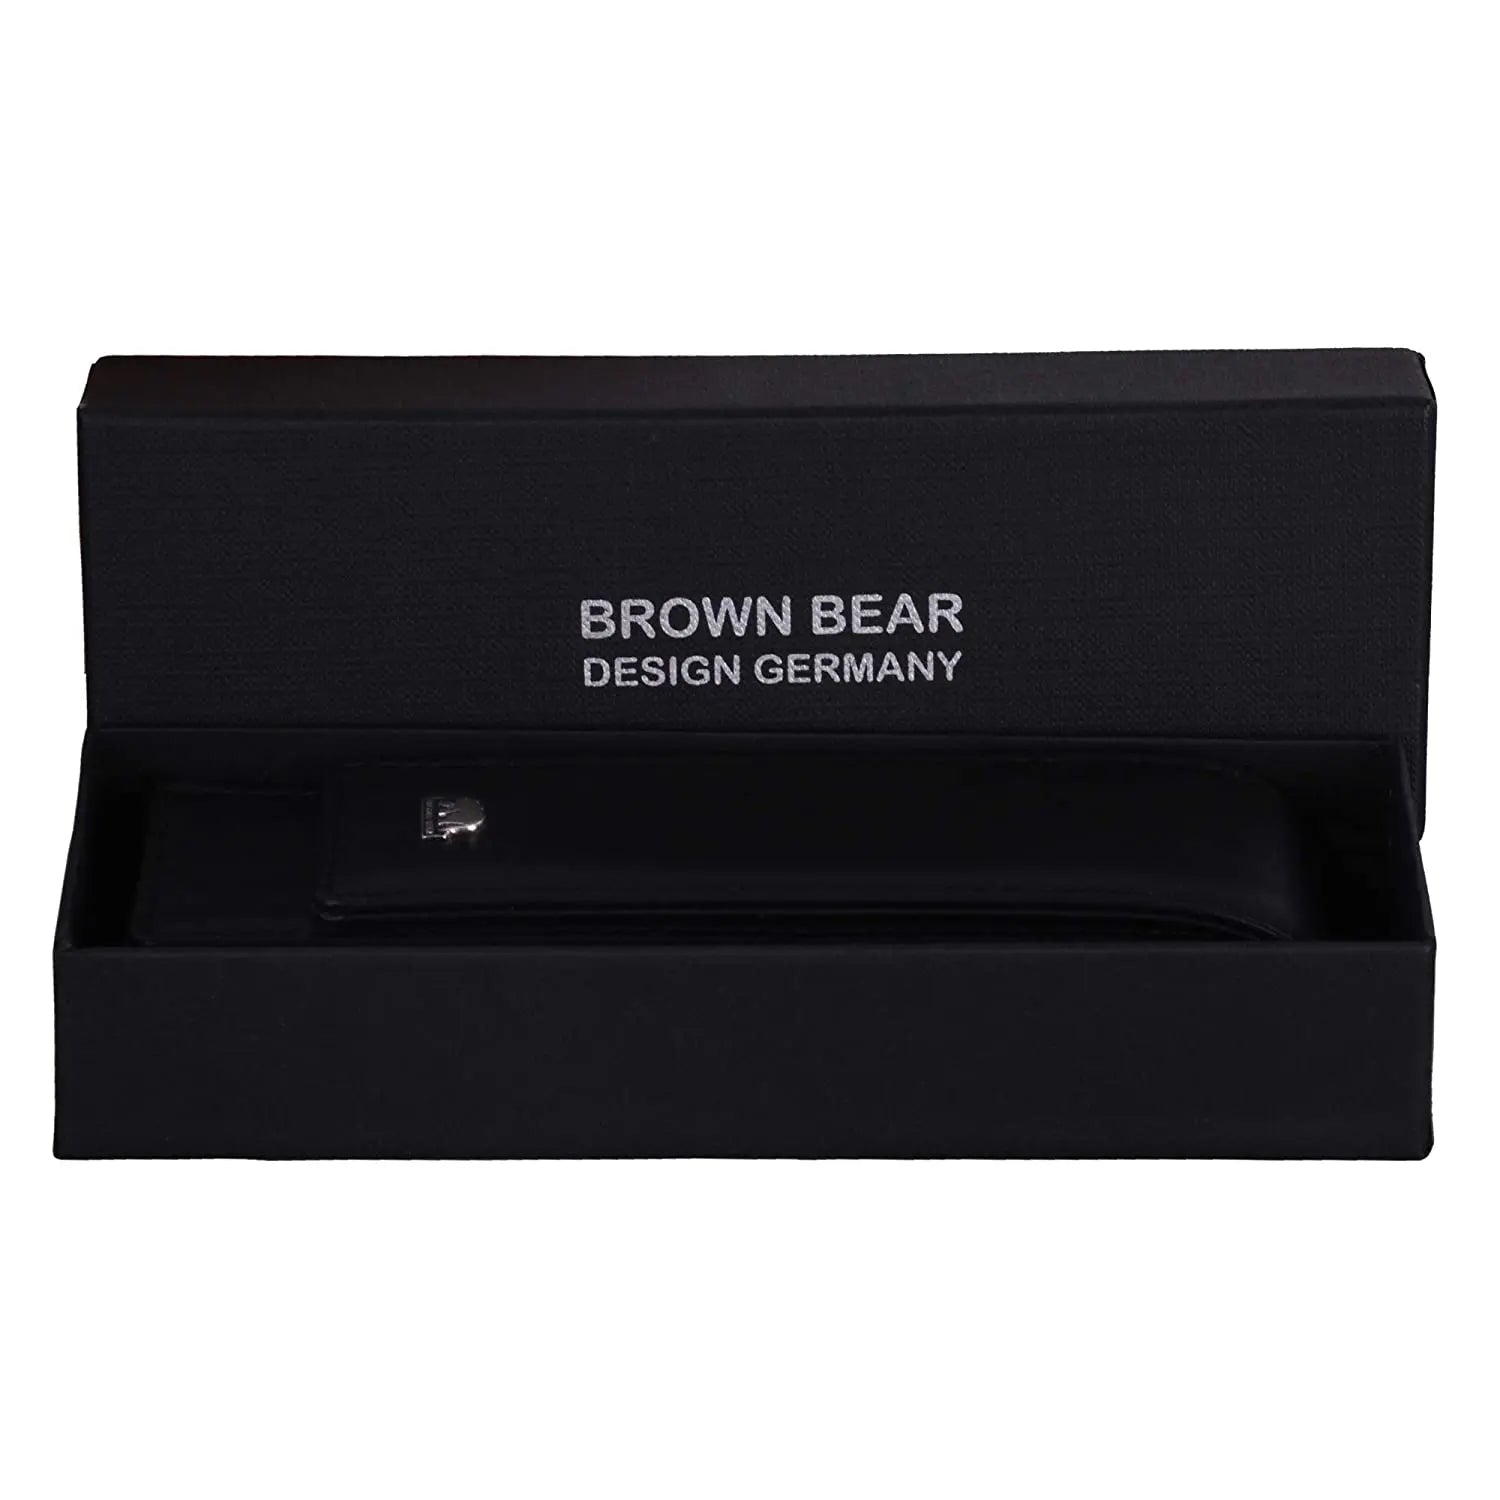 Brown Bear Classic Pen Case Holder for 2 Pens in Genuine Leather - Brown Bear